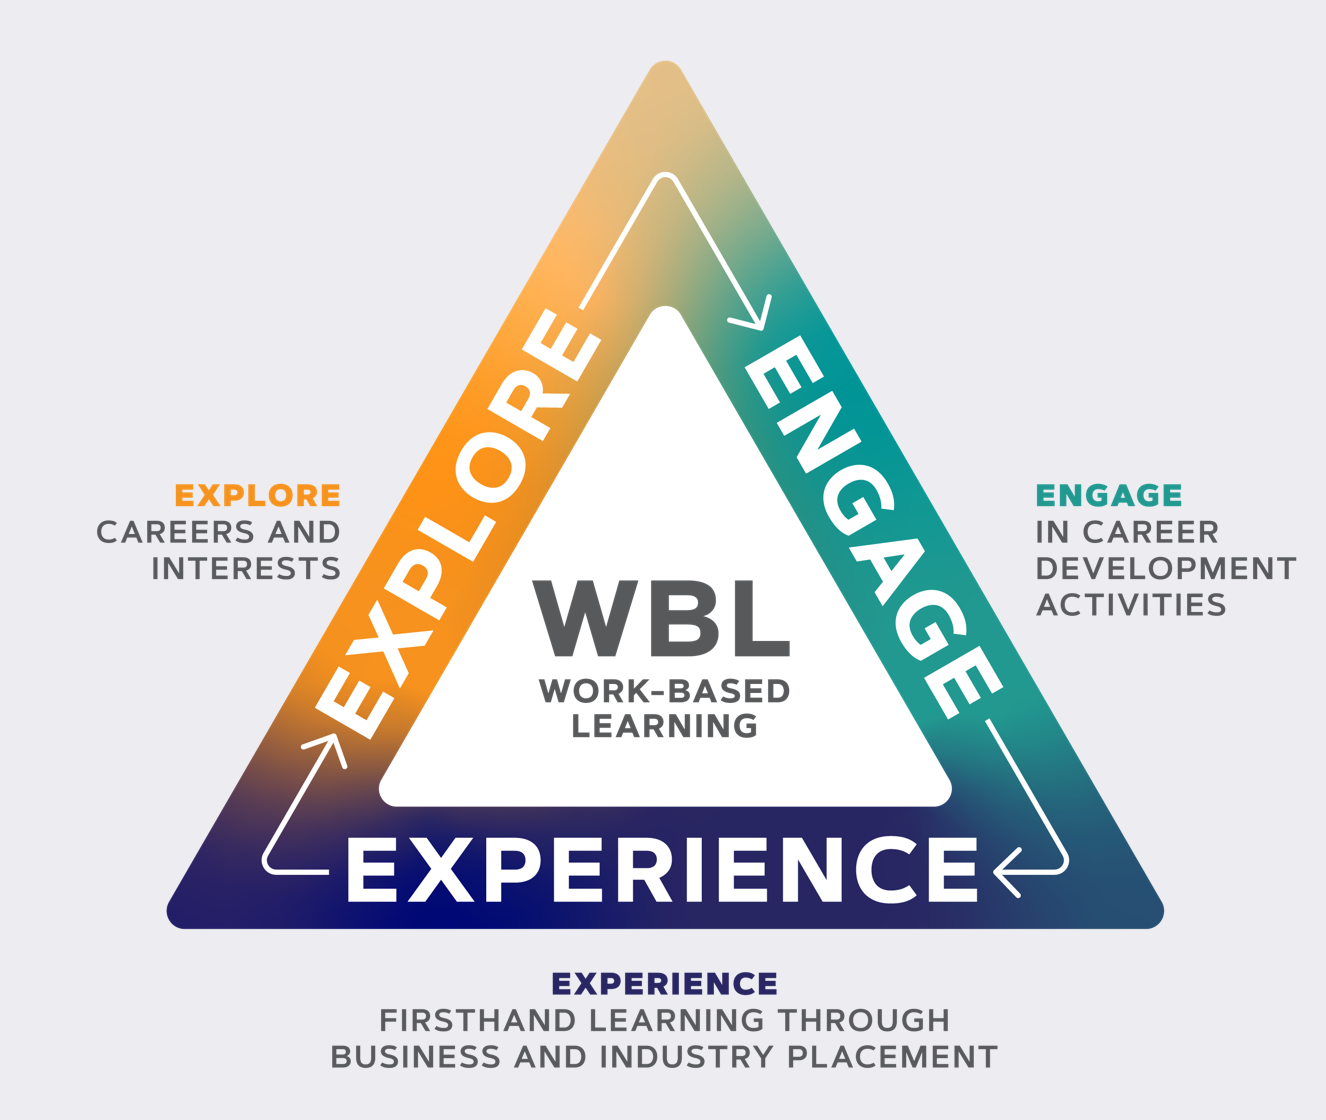 Diagram showing the three phases of WBL, work-based learning. 1. Explore careers and interests. 2. Engage in career development activities. 3. Experience firsthand learning through business and industry placement.